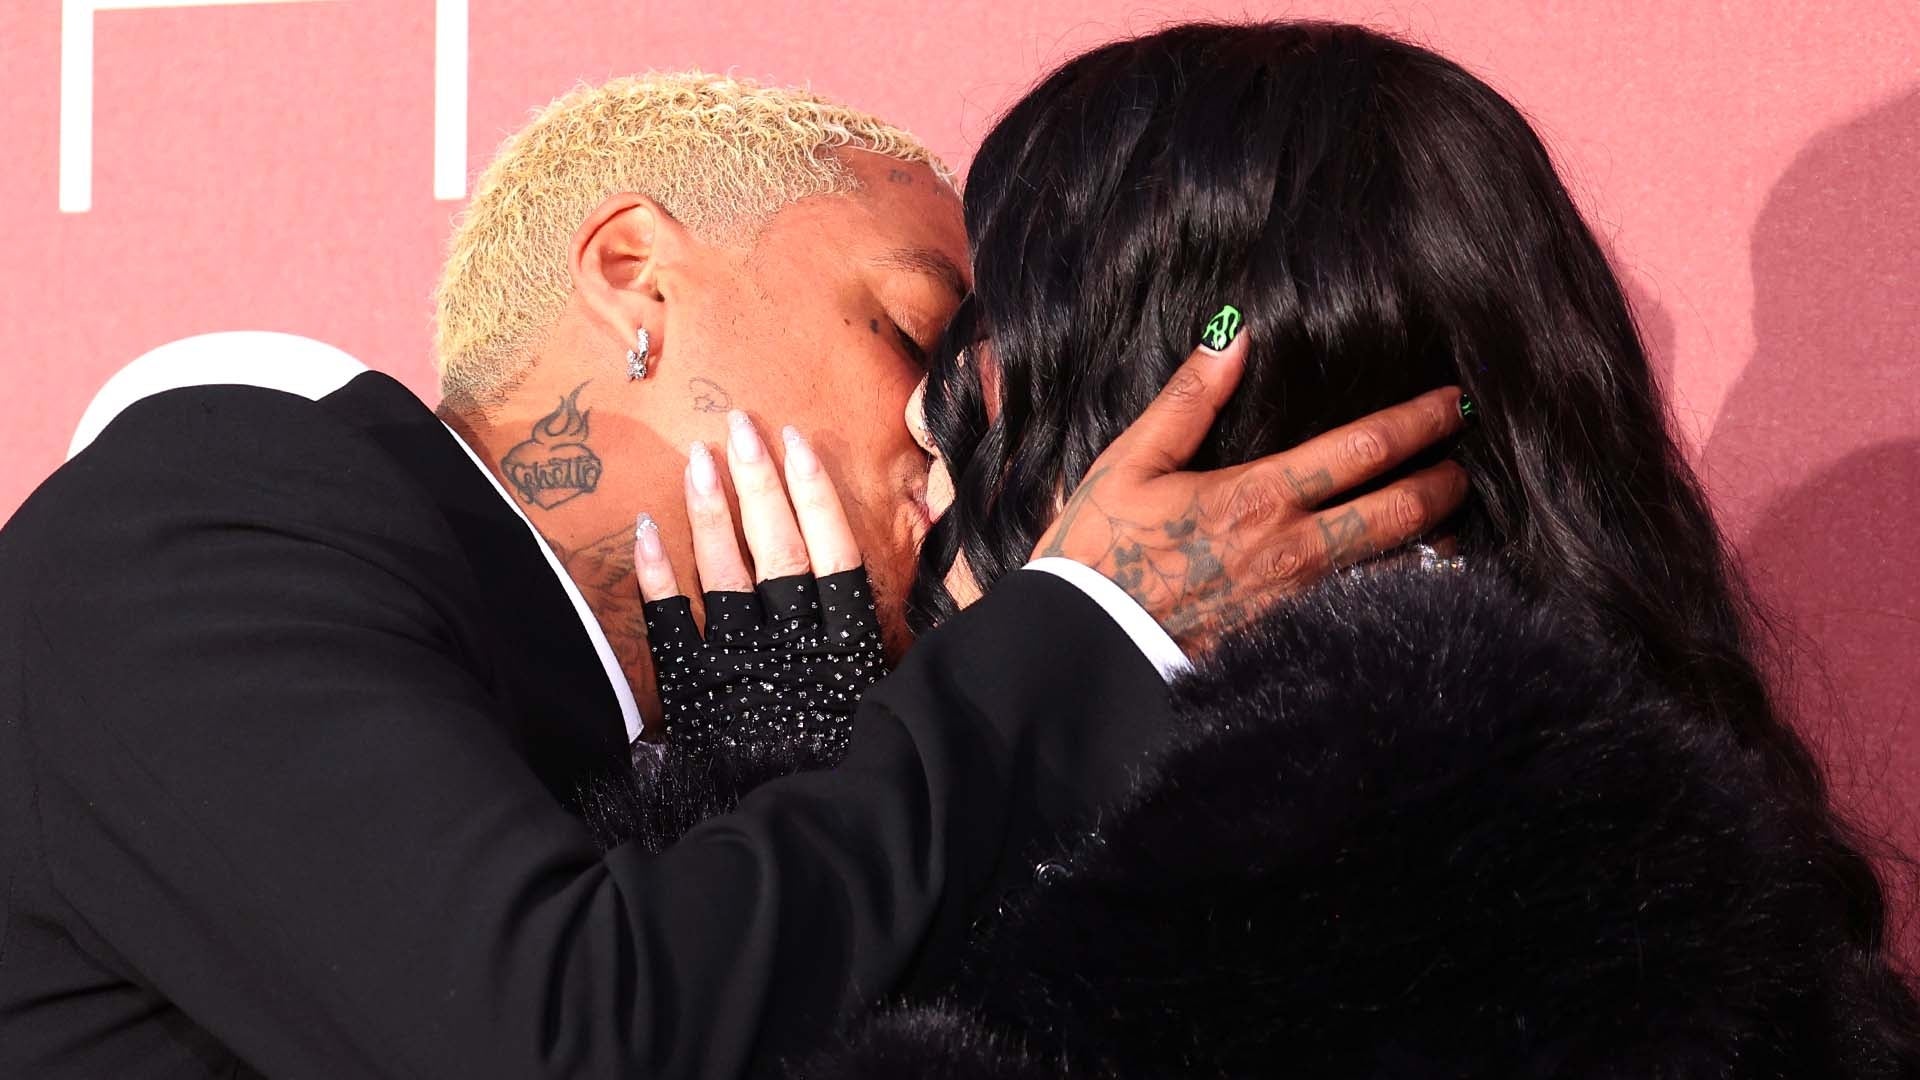 Cher and Boyfriend AE Can't Stop Kissing on PDA-Filled Cannes Carpet